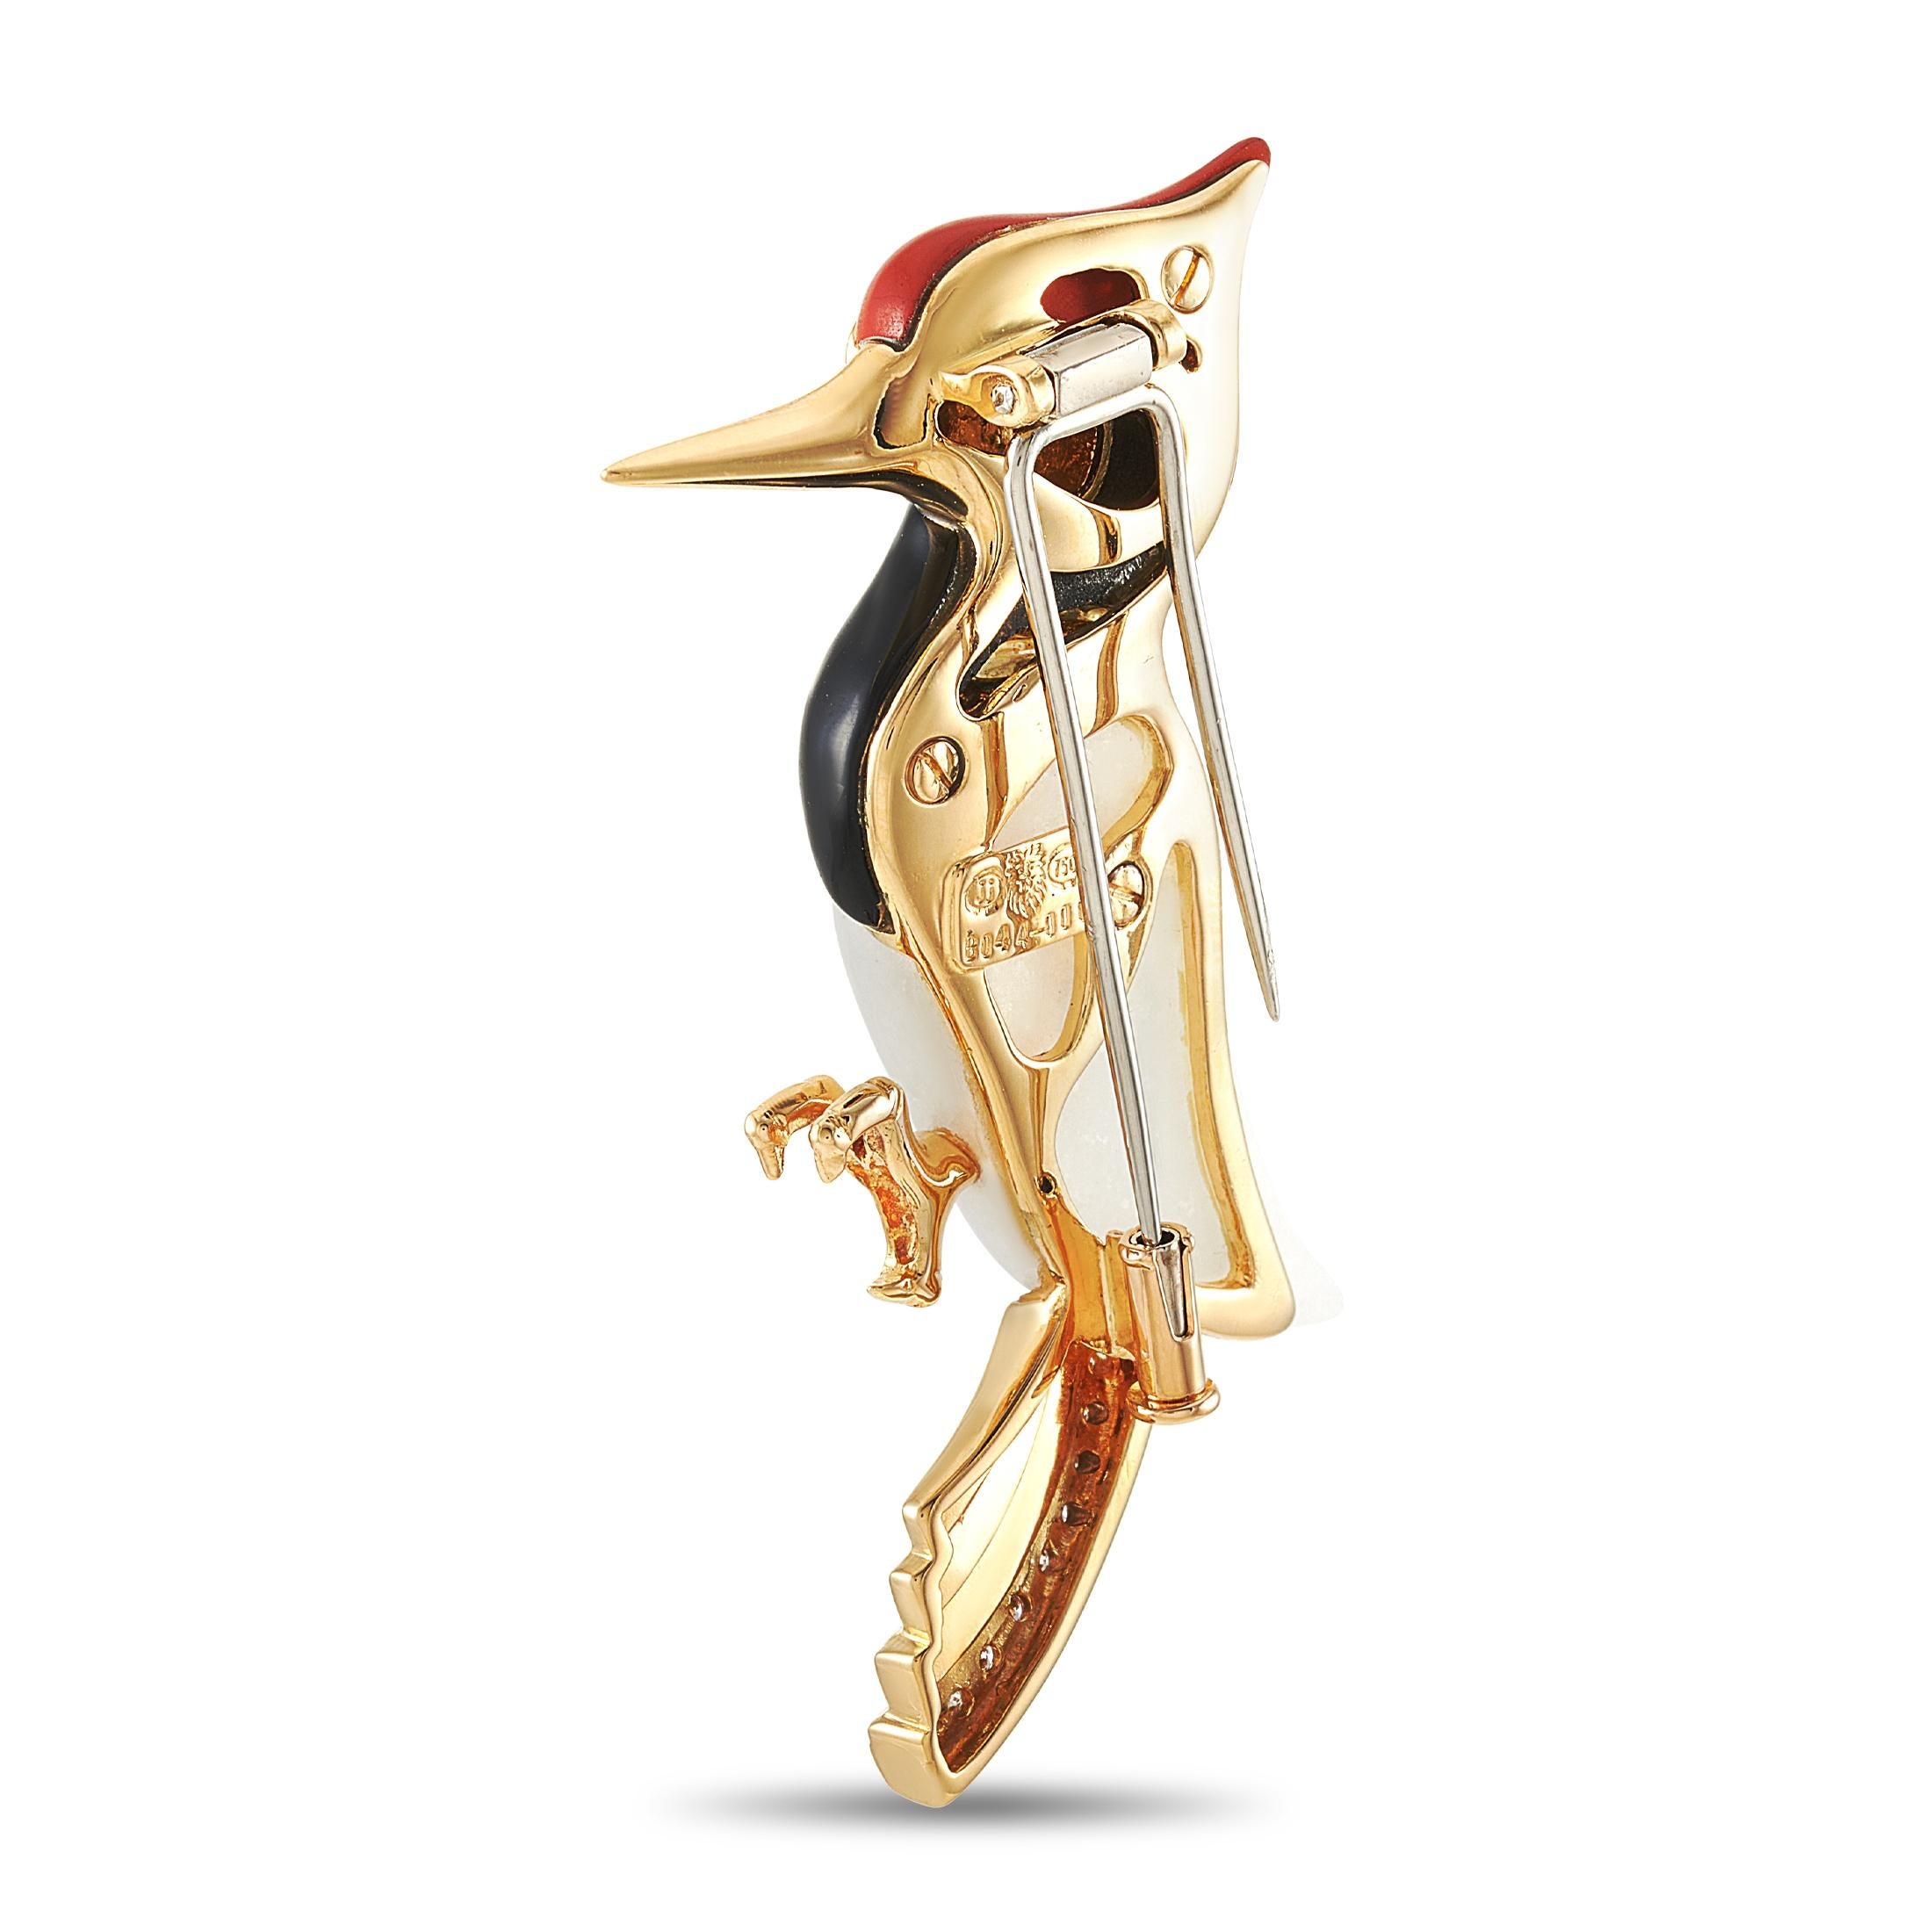 This Dominique Arpels bird brooch is made of 18K yellow gold and embellished with diamonds, onyx, and carnelian. The brooch weighs 16.1 grams and measures 2” in length and 1.50” in width.
 
 Offered in estate condition, this jewelry piece includes a